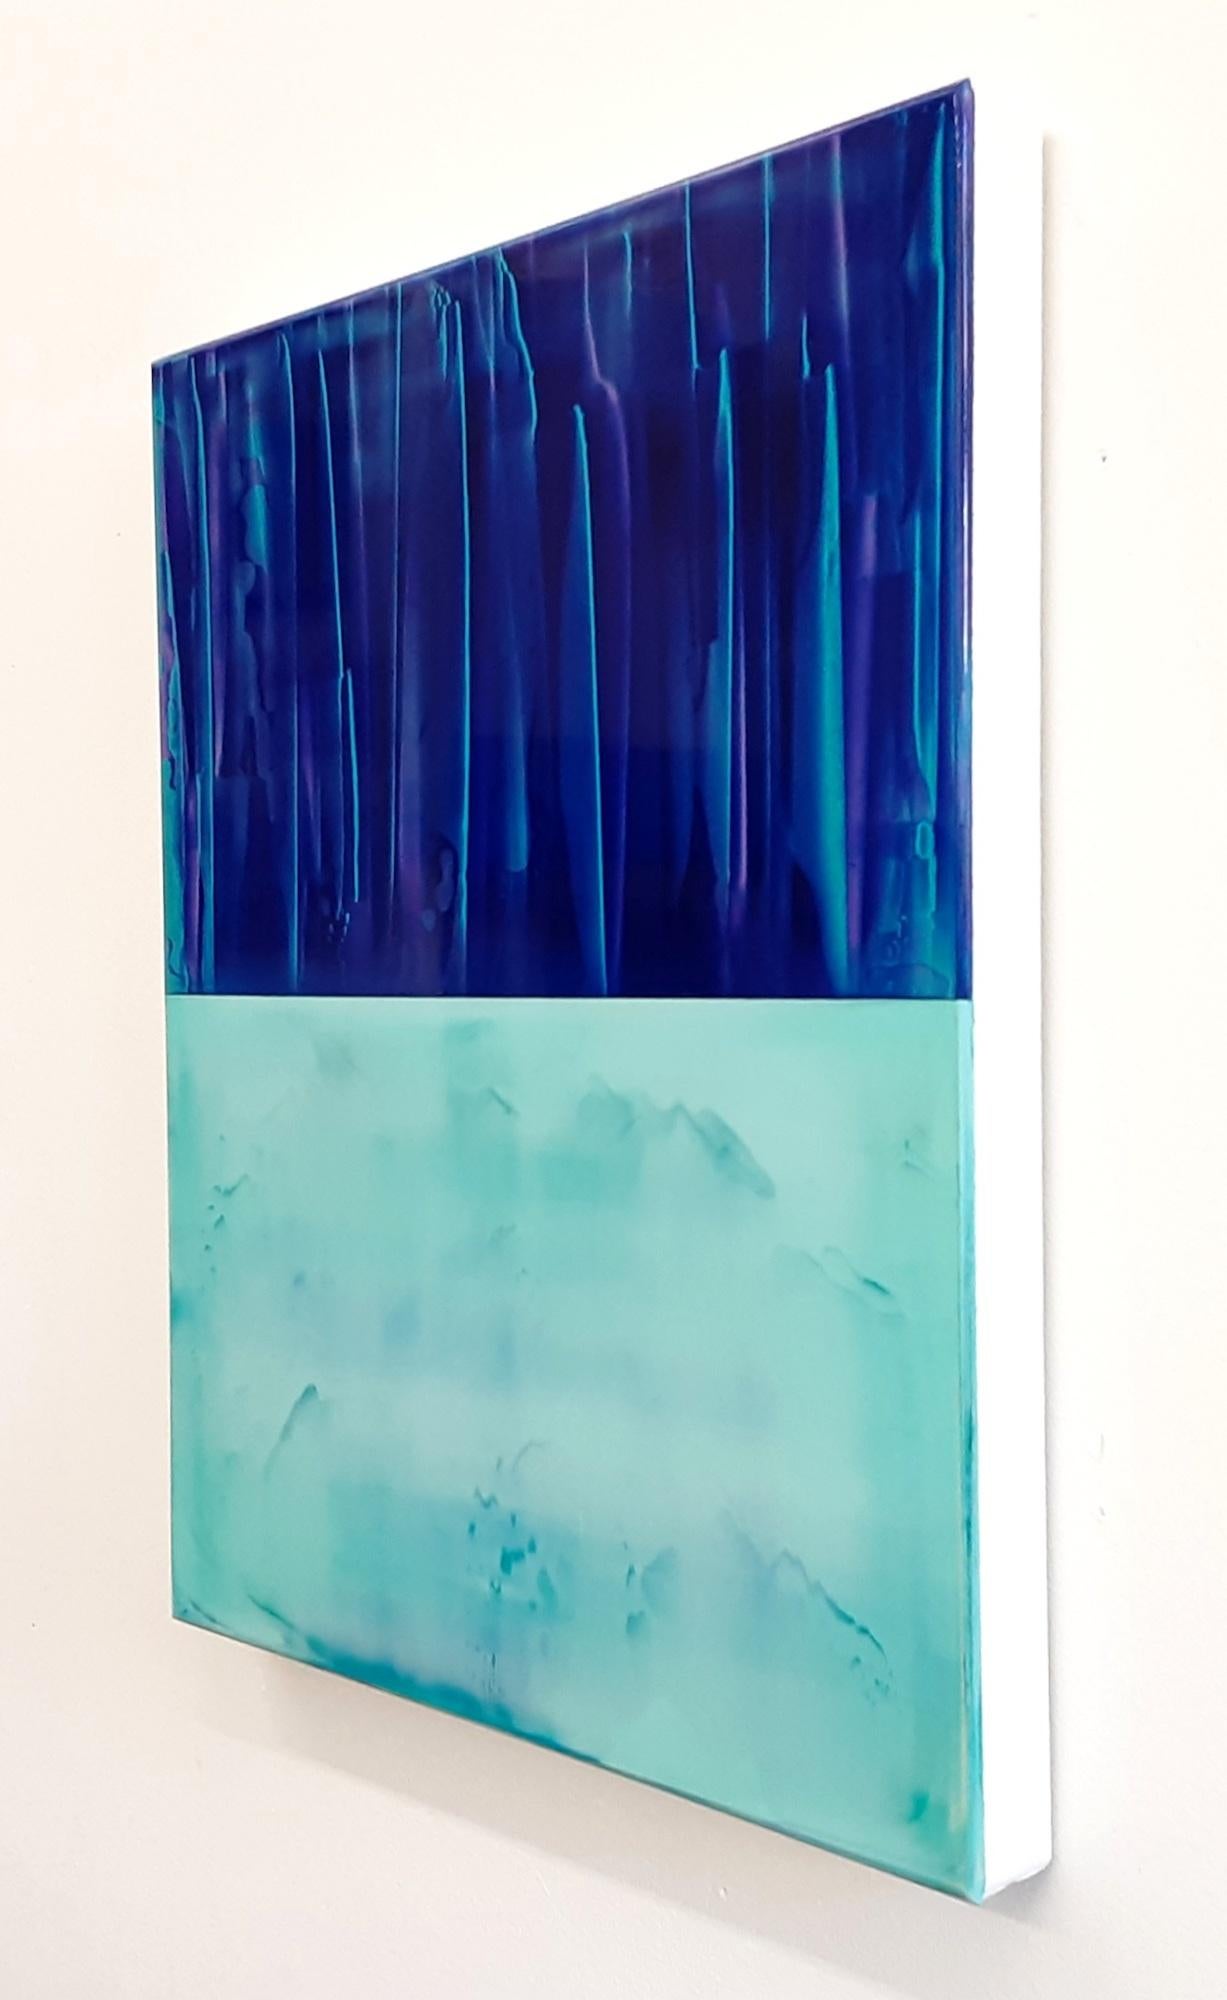 Contrapuntal (3/18) by James Lumsden - Abstract colour painting, blue tones For Sale 4